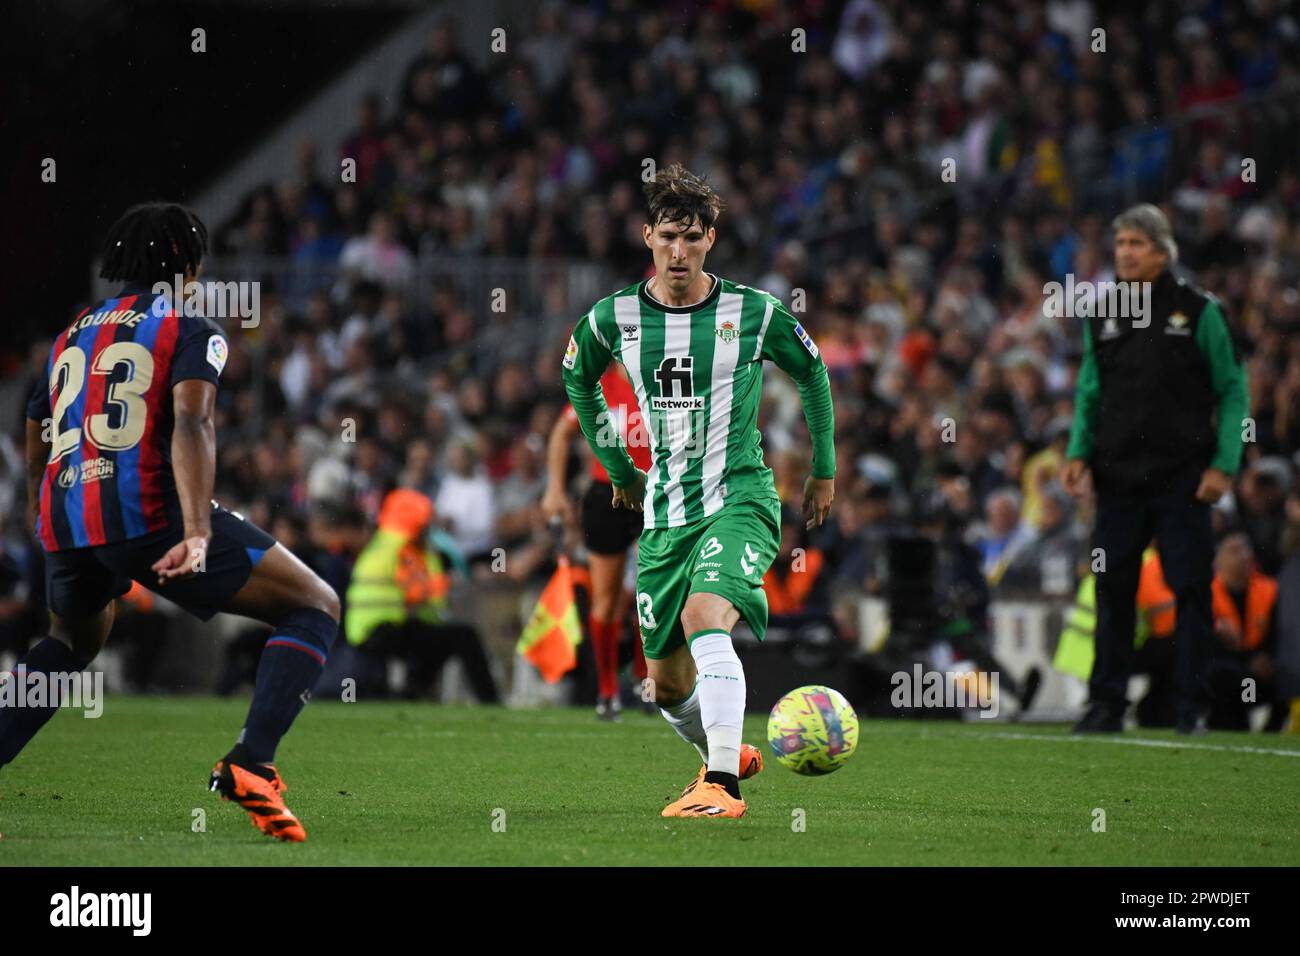 BARCELONA, SPAIN - APRIL 29: La Liga Santander match between FC Barcelona and Real Betis at Spotify Camp Nou on April 29, 2023, in Barcelona, Spain. (Photo by Sara Aribó/PxImages) Stock Photo